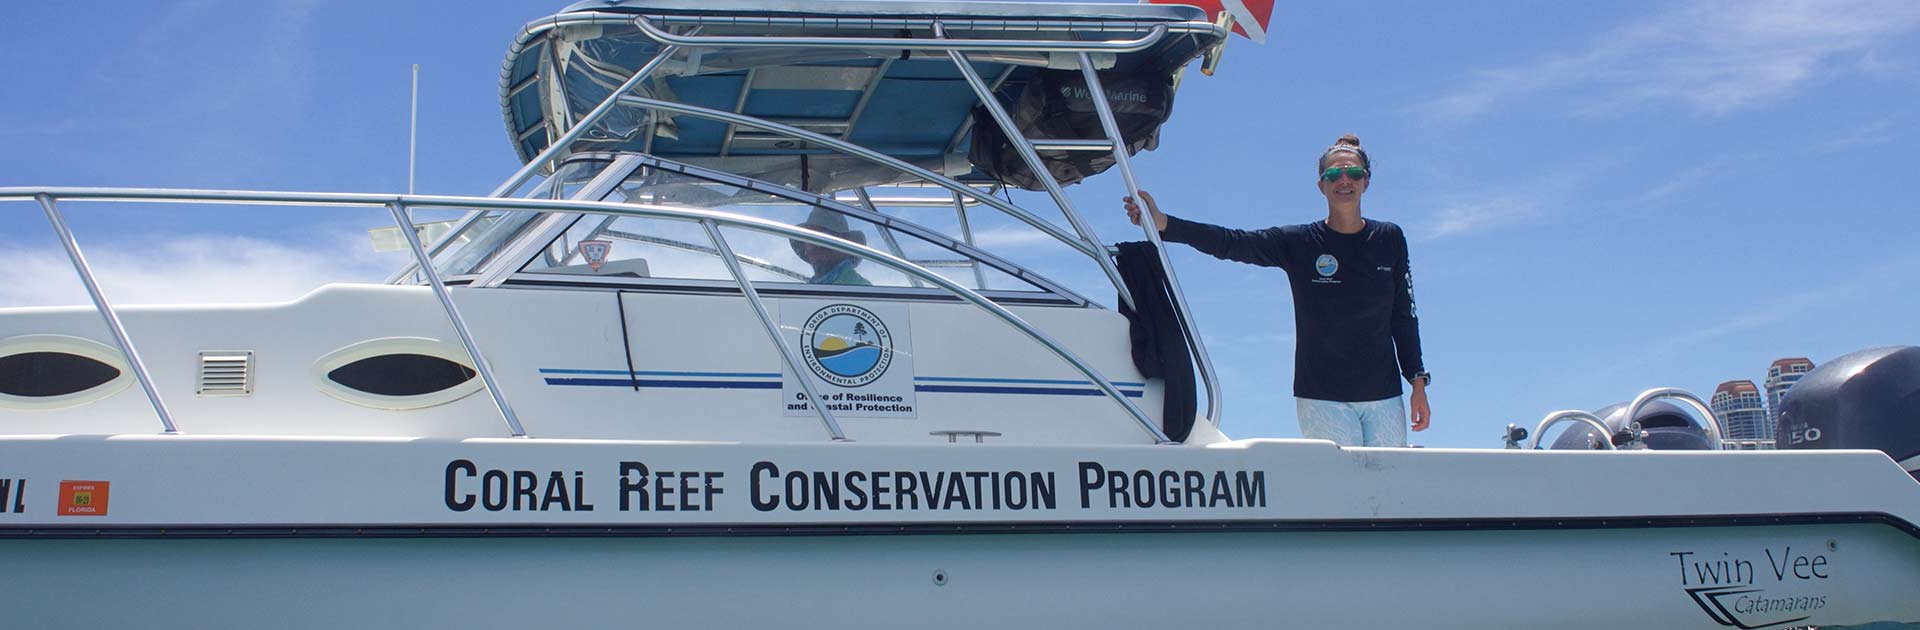 Coral Reef Conservation Program vessel and staff during field-work